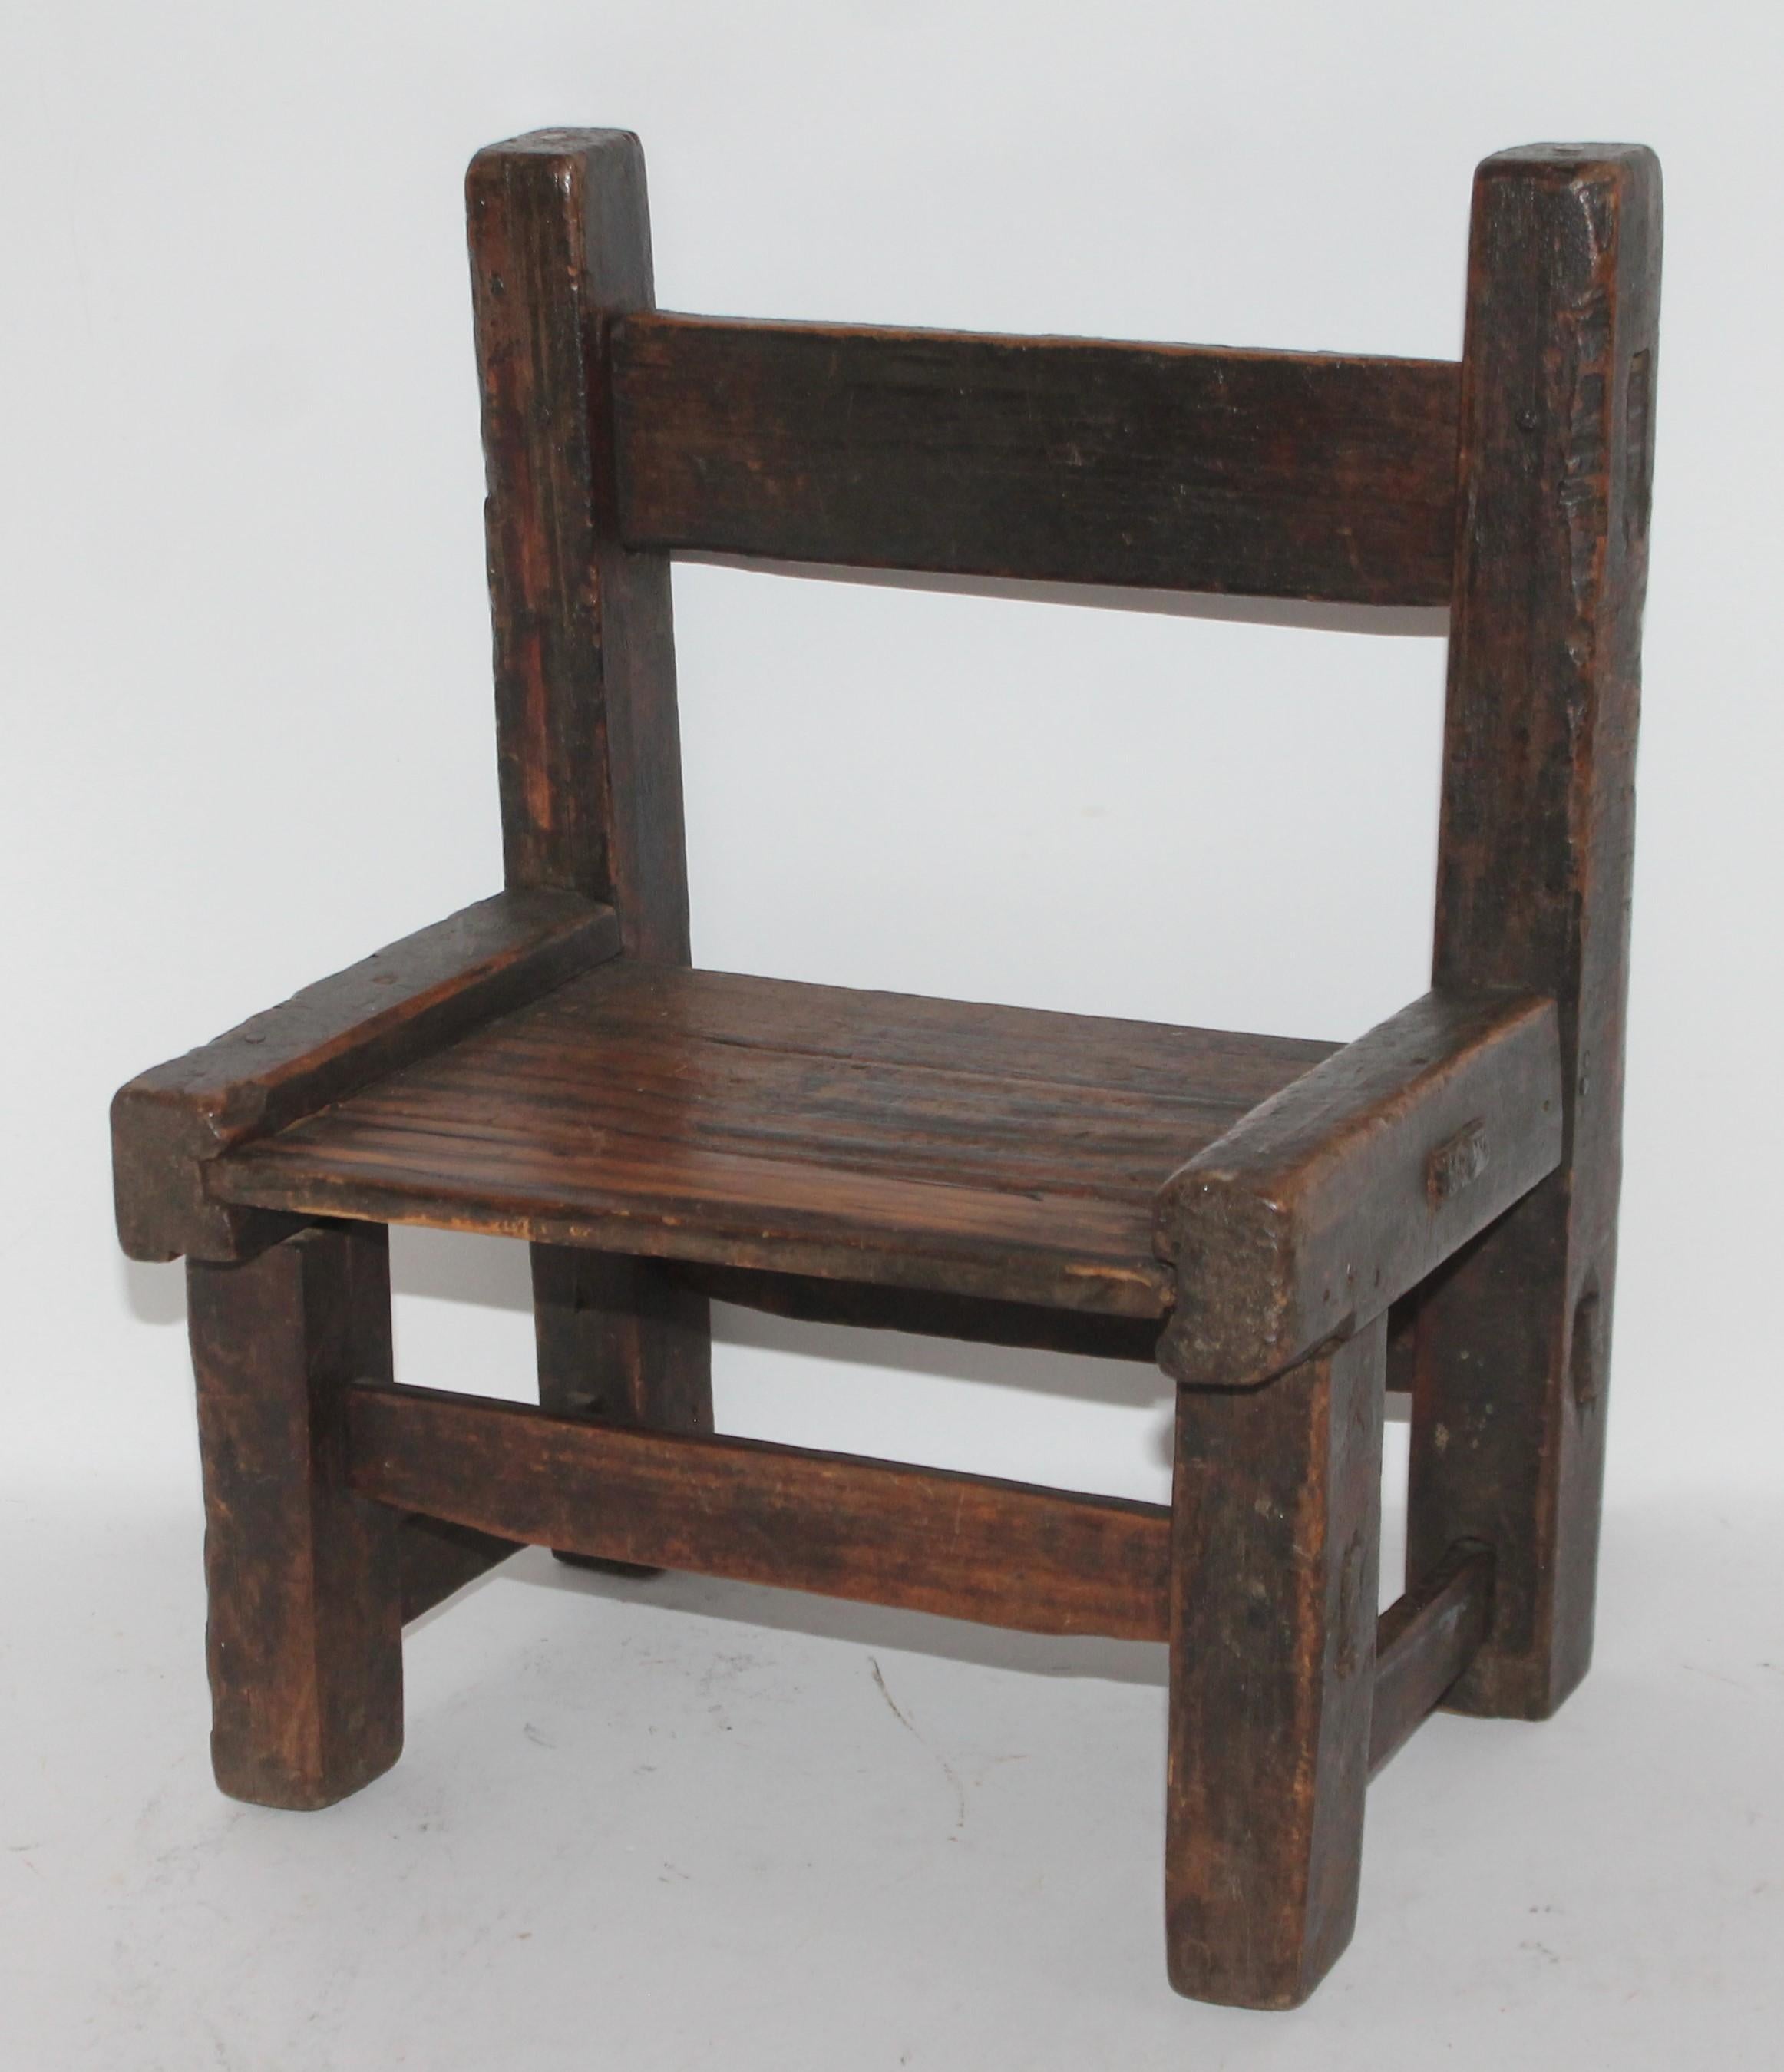 19th century original old surface child's chair from the Pueblo in New Mexico. The construction is mortised on all sides.